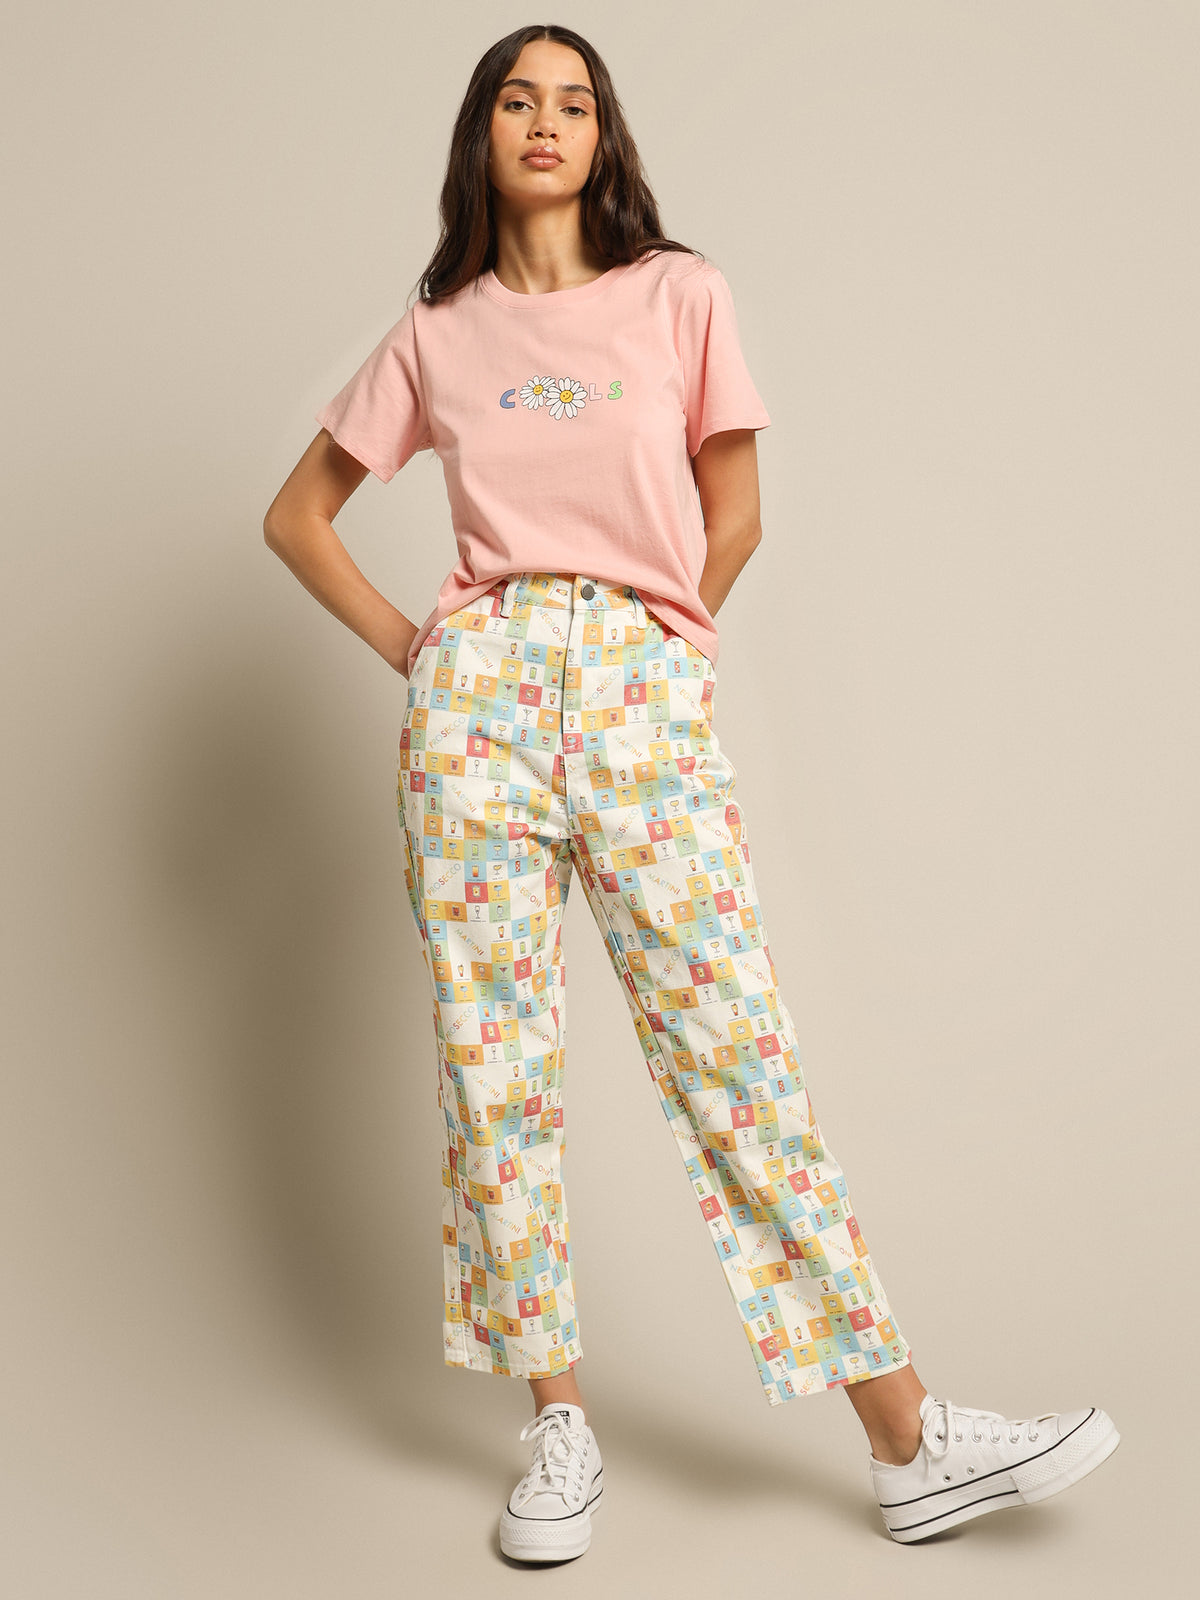 California Pants in Cocktail Hour Print